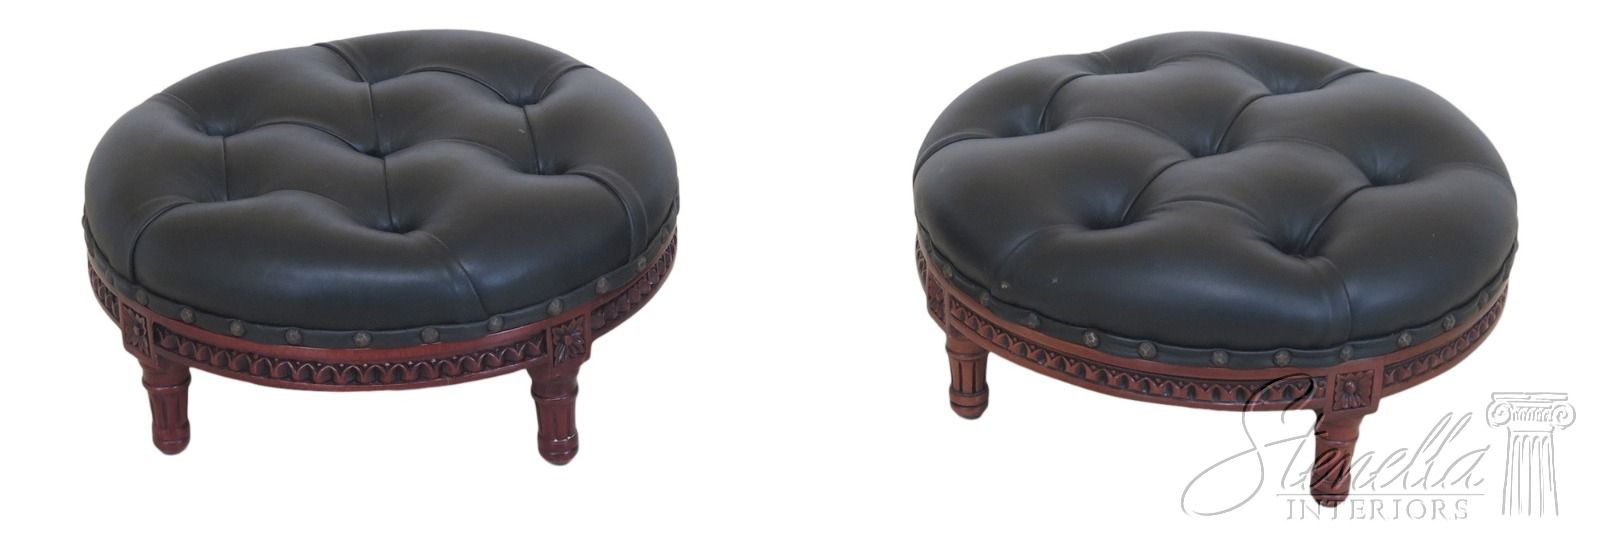 F31341ec: Pair Round Tufted Black Leather Ottoman Or Stools Regarding Black Leather Foot Stools (View 11 of 20)